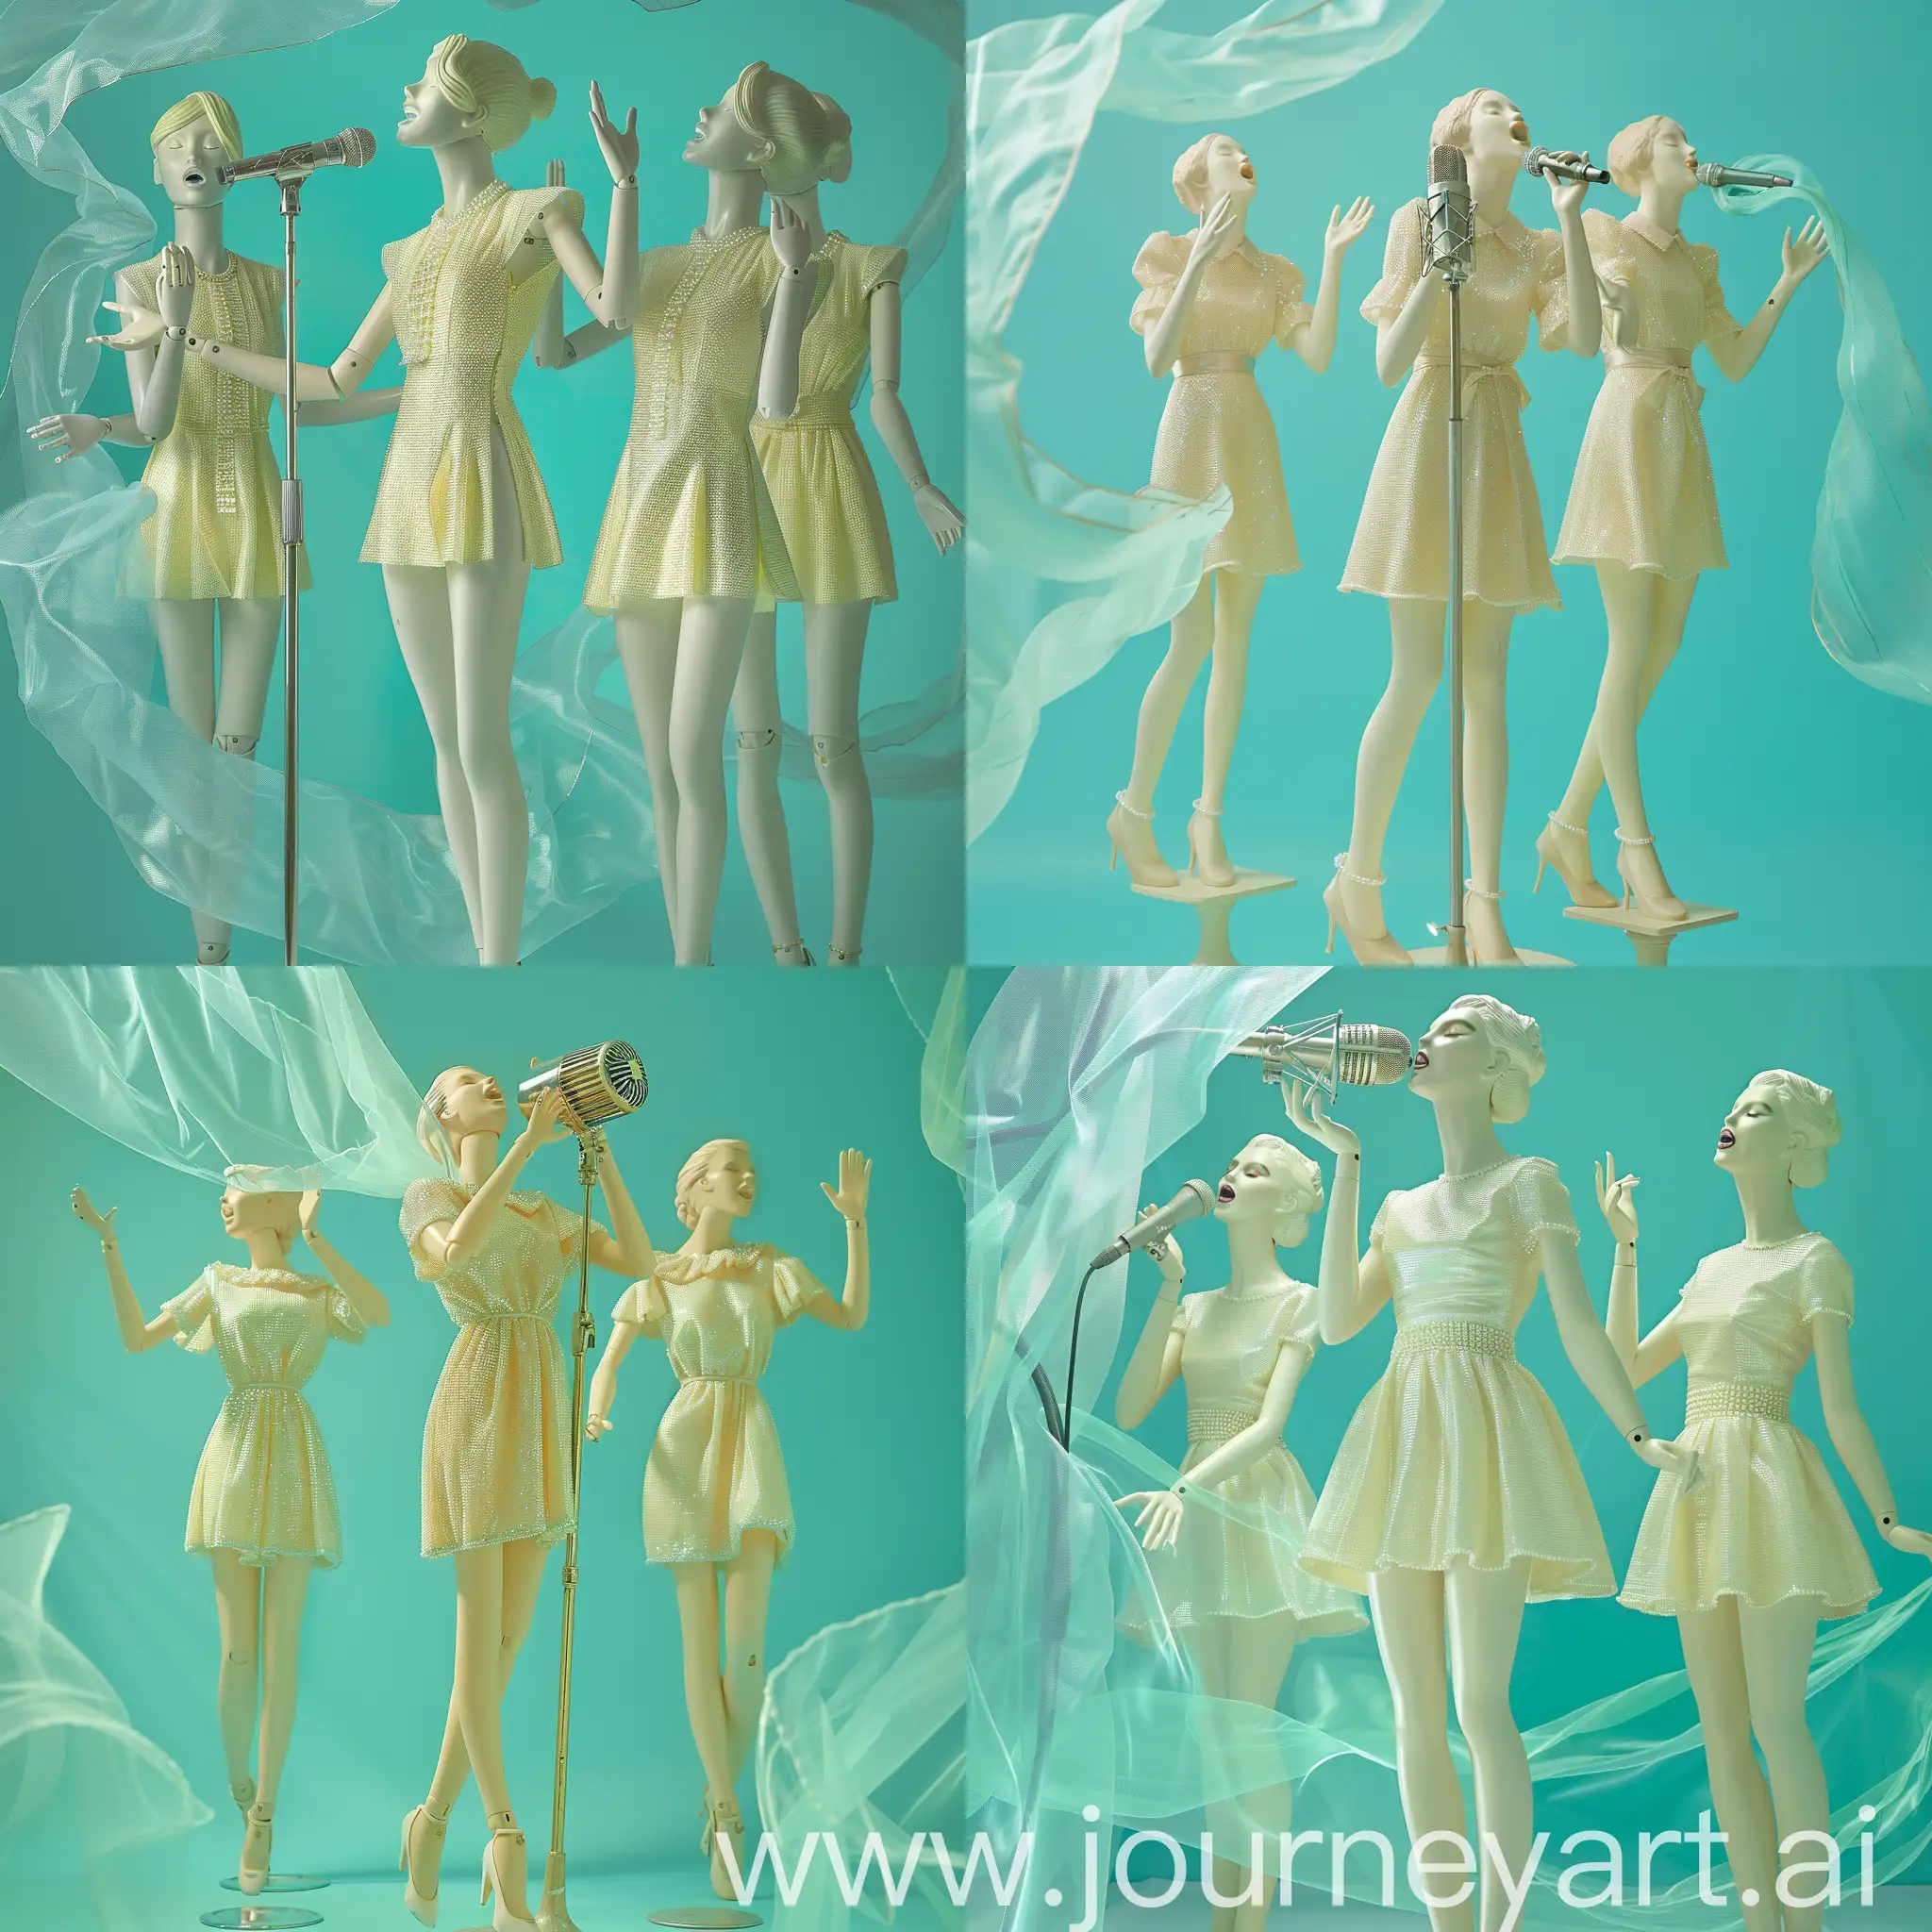 prom dress store retail shows three female antique mannequins singing in one vintage  mic in romantic light  .  all of them is singing in the mic , every mannequin is showing  different emotional hand movements from others  as she is singing  ,each mannequin wears a plain light yellow pearled short cute dress . the background is aqua blue . an aqua blue organza fabric is flying in a smooth way begins  from the top left from the back ground and comes around the mannequins legs .